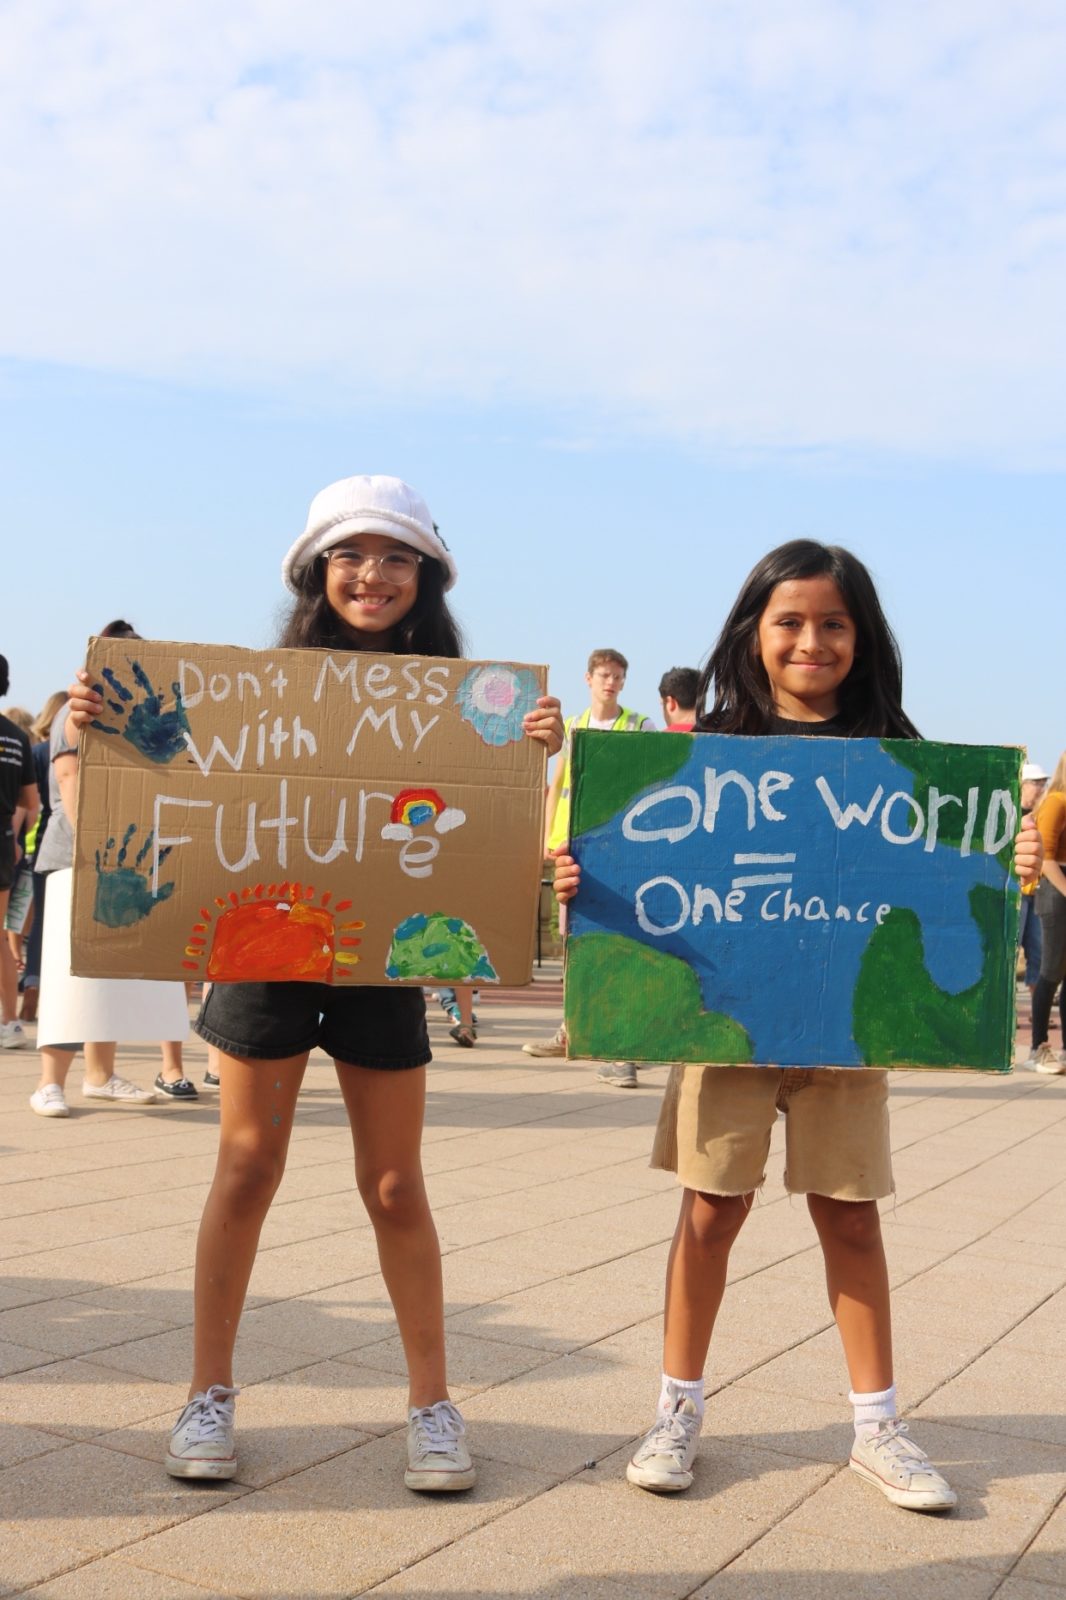 Two young activists hold signs saying "Don't mess with my future" and "One world, one chance" during the September 2019 Climate Strike.